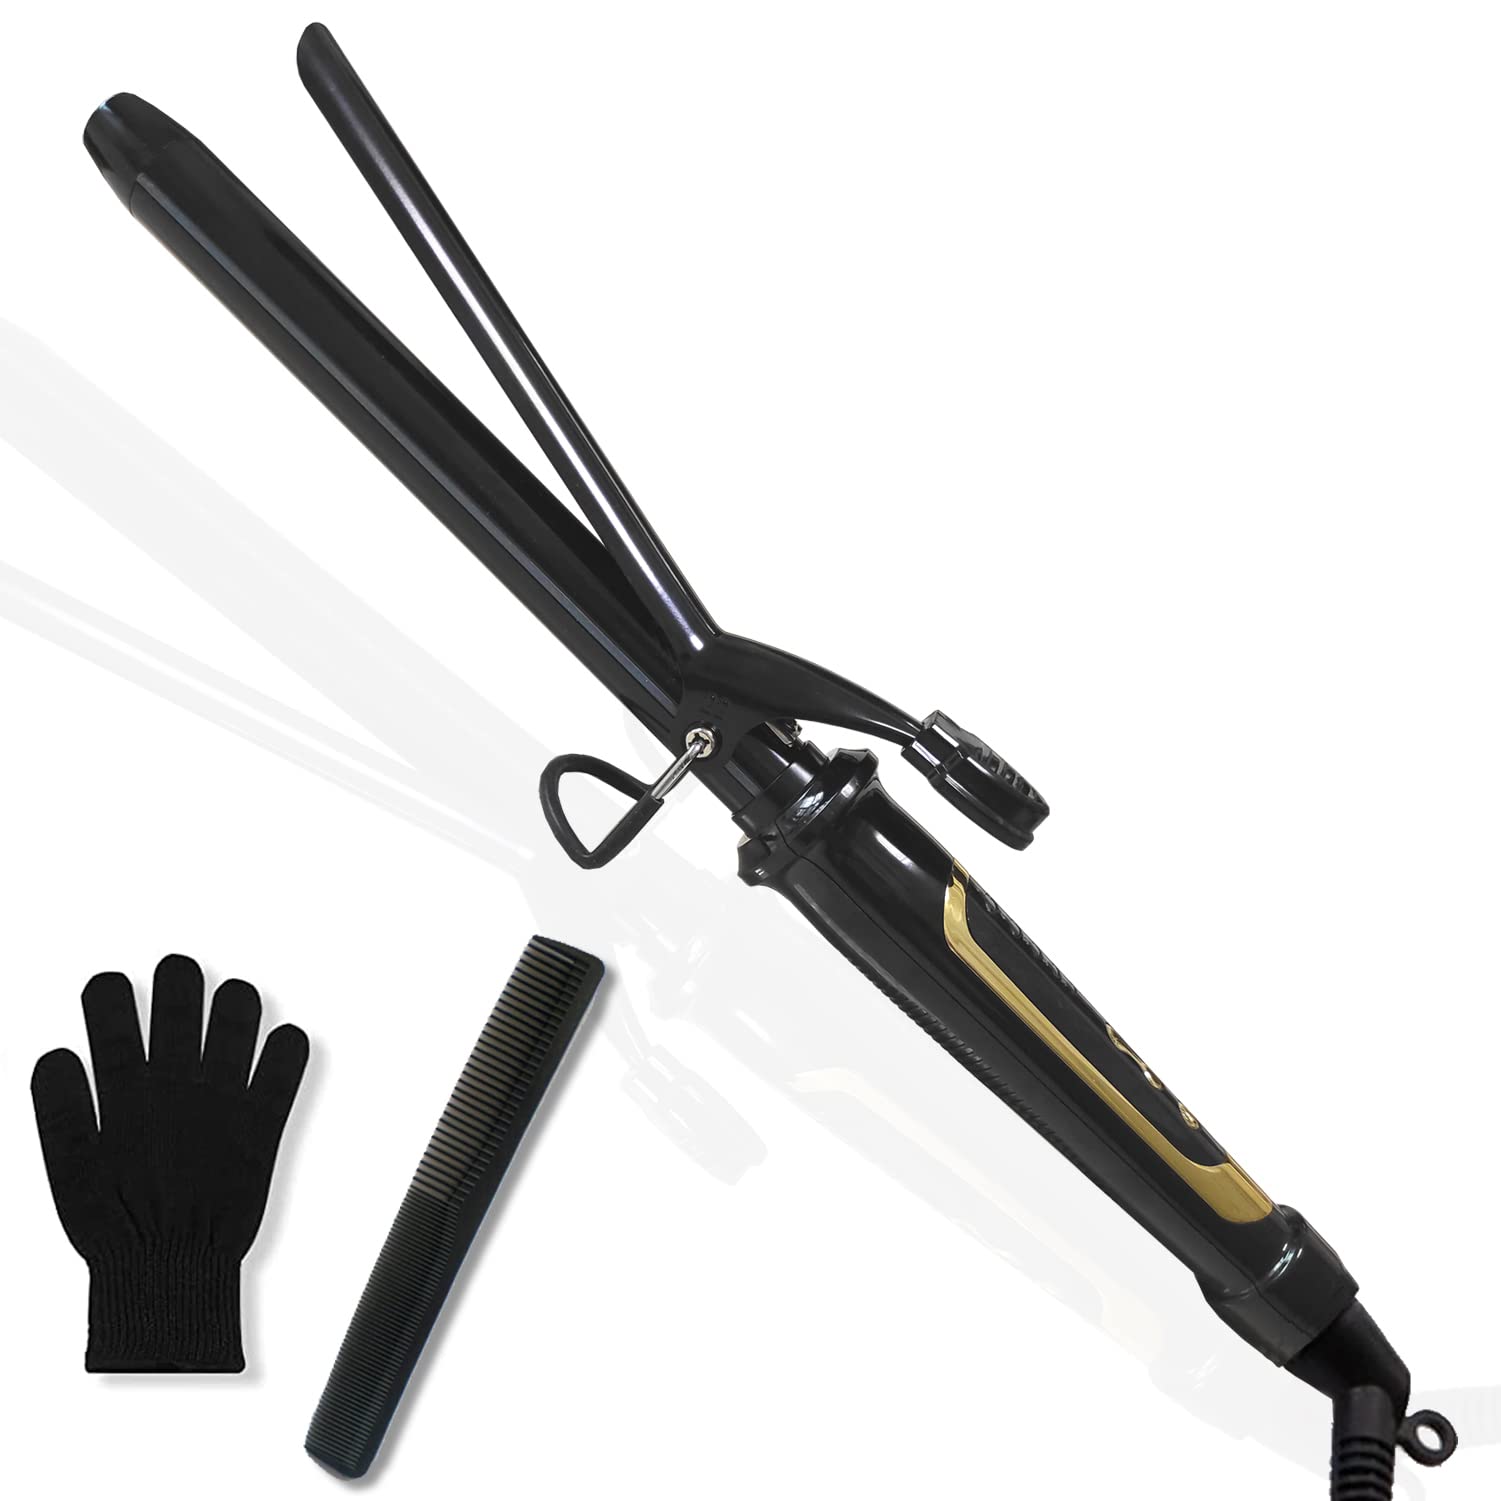 1 Inch Curling Iron with Ceramic Coating Barrel for Long/Medium